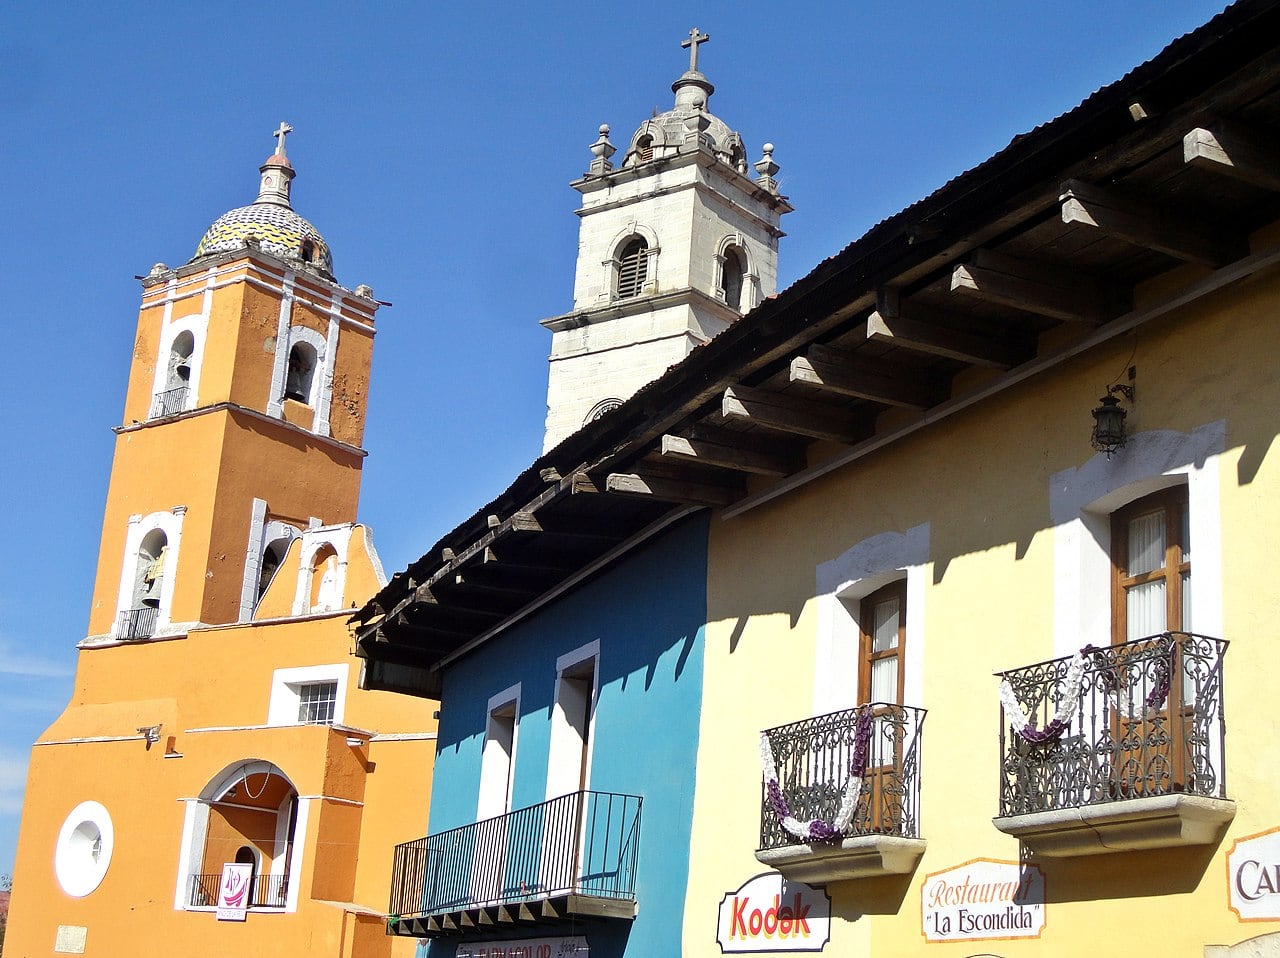 Church bell towers and colorful homes